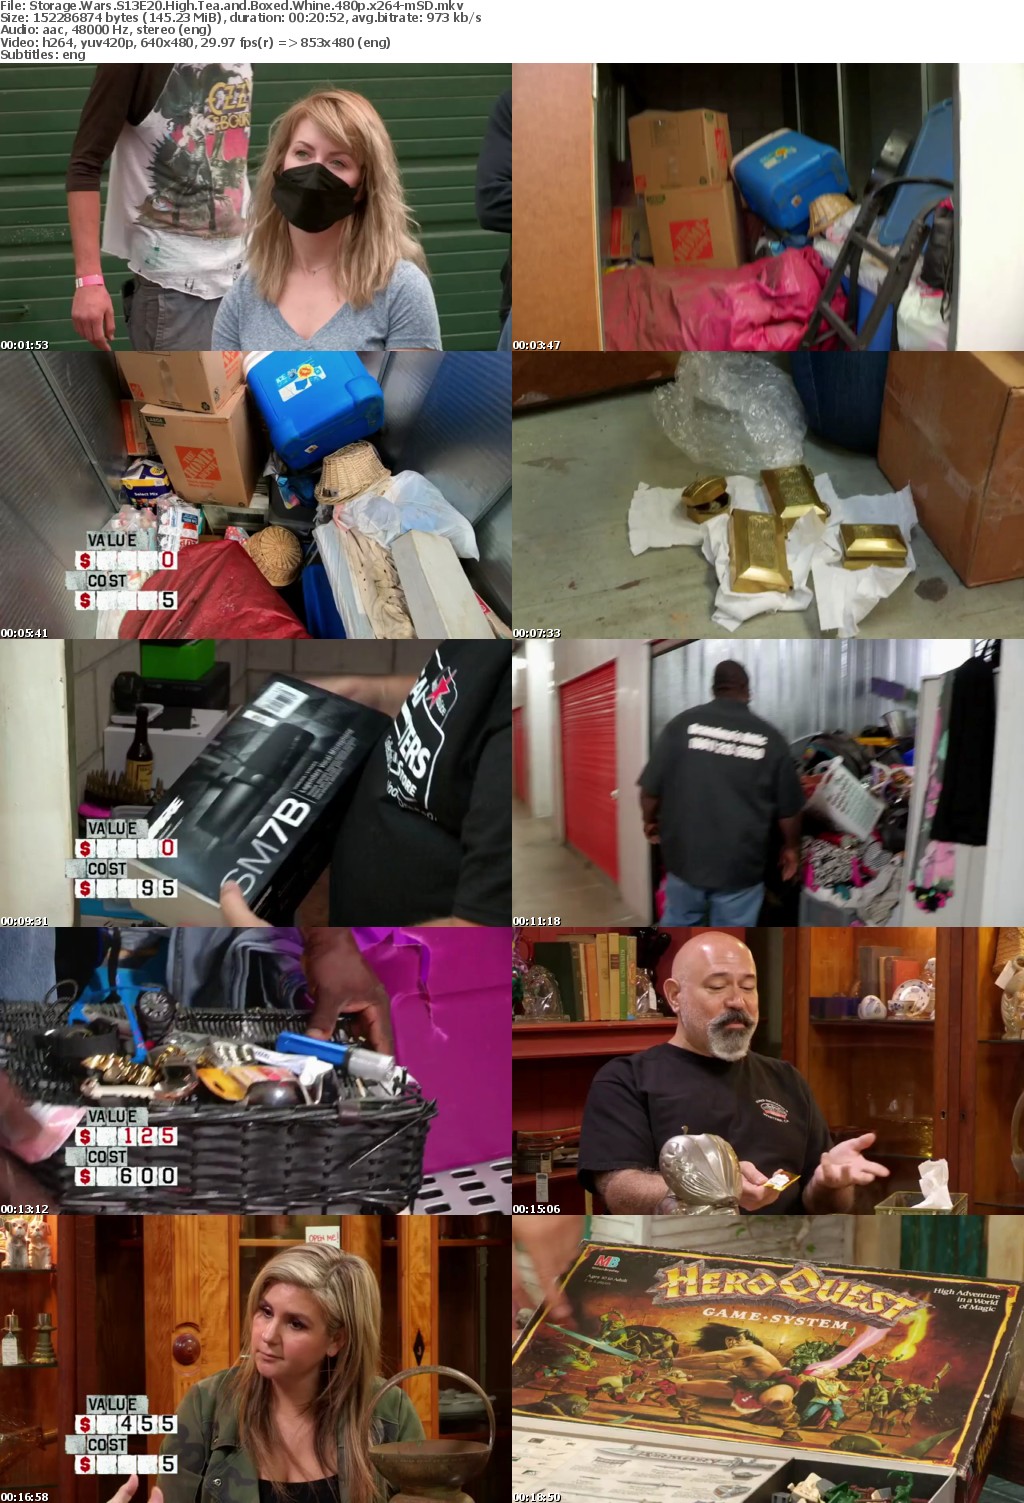 Storage Wars S13E20 High Tea and Boxed Whine 480p x264-mSD